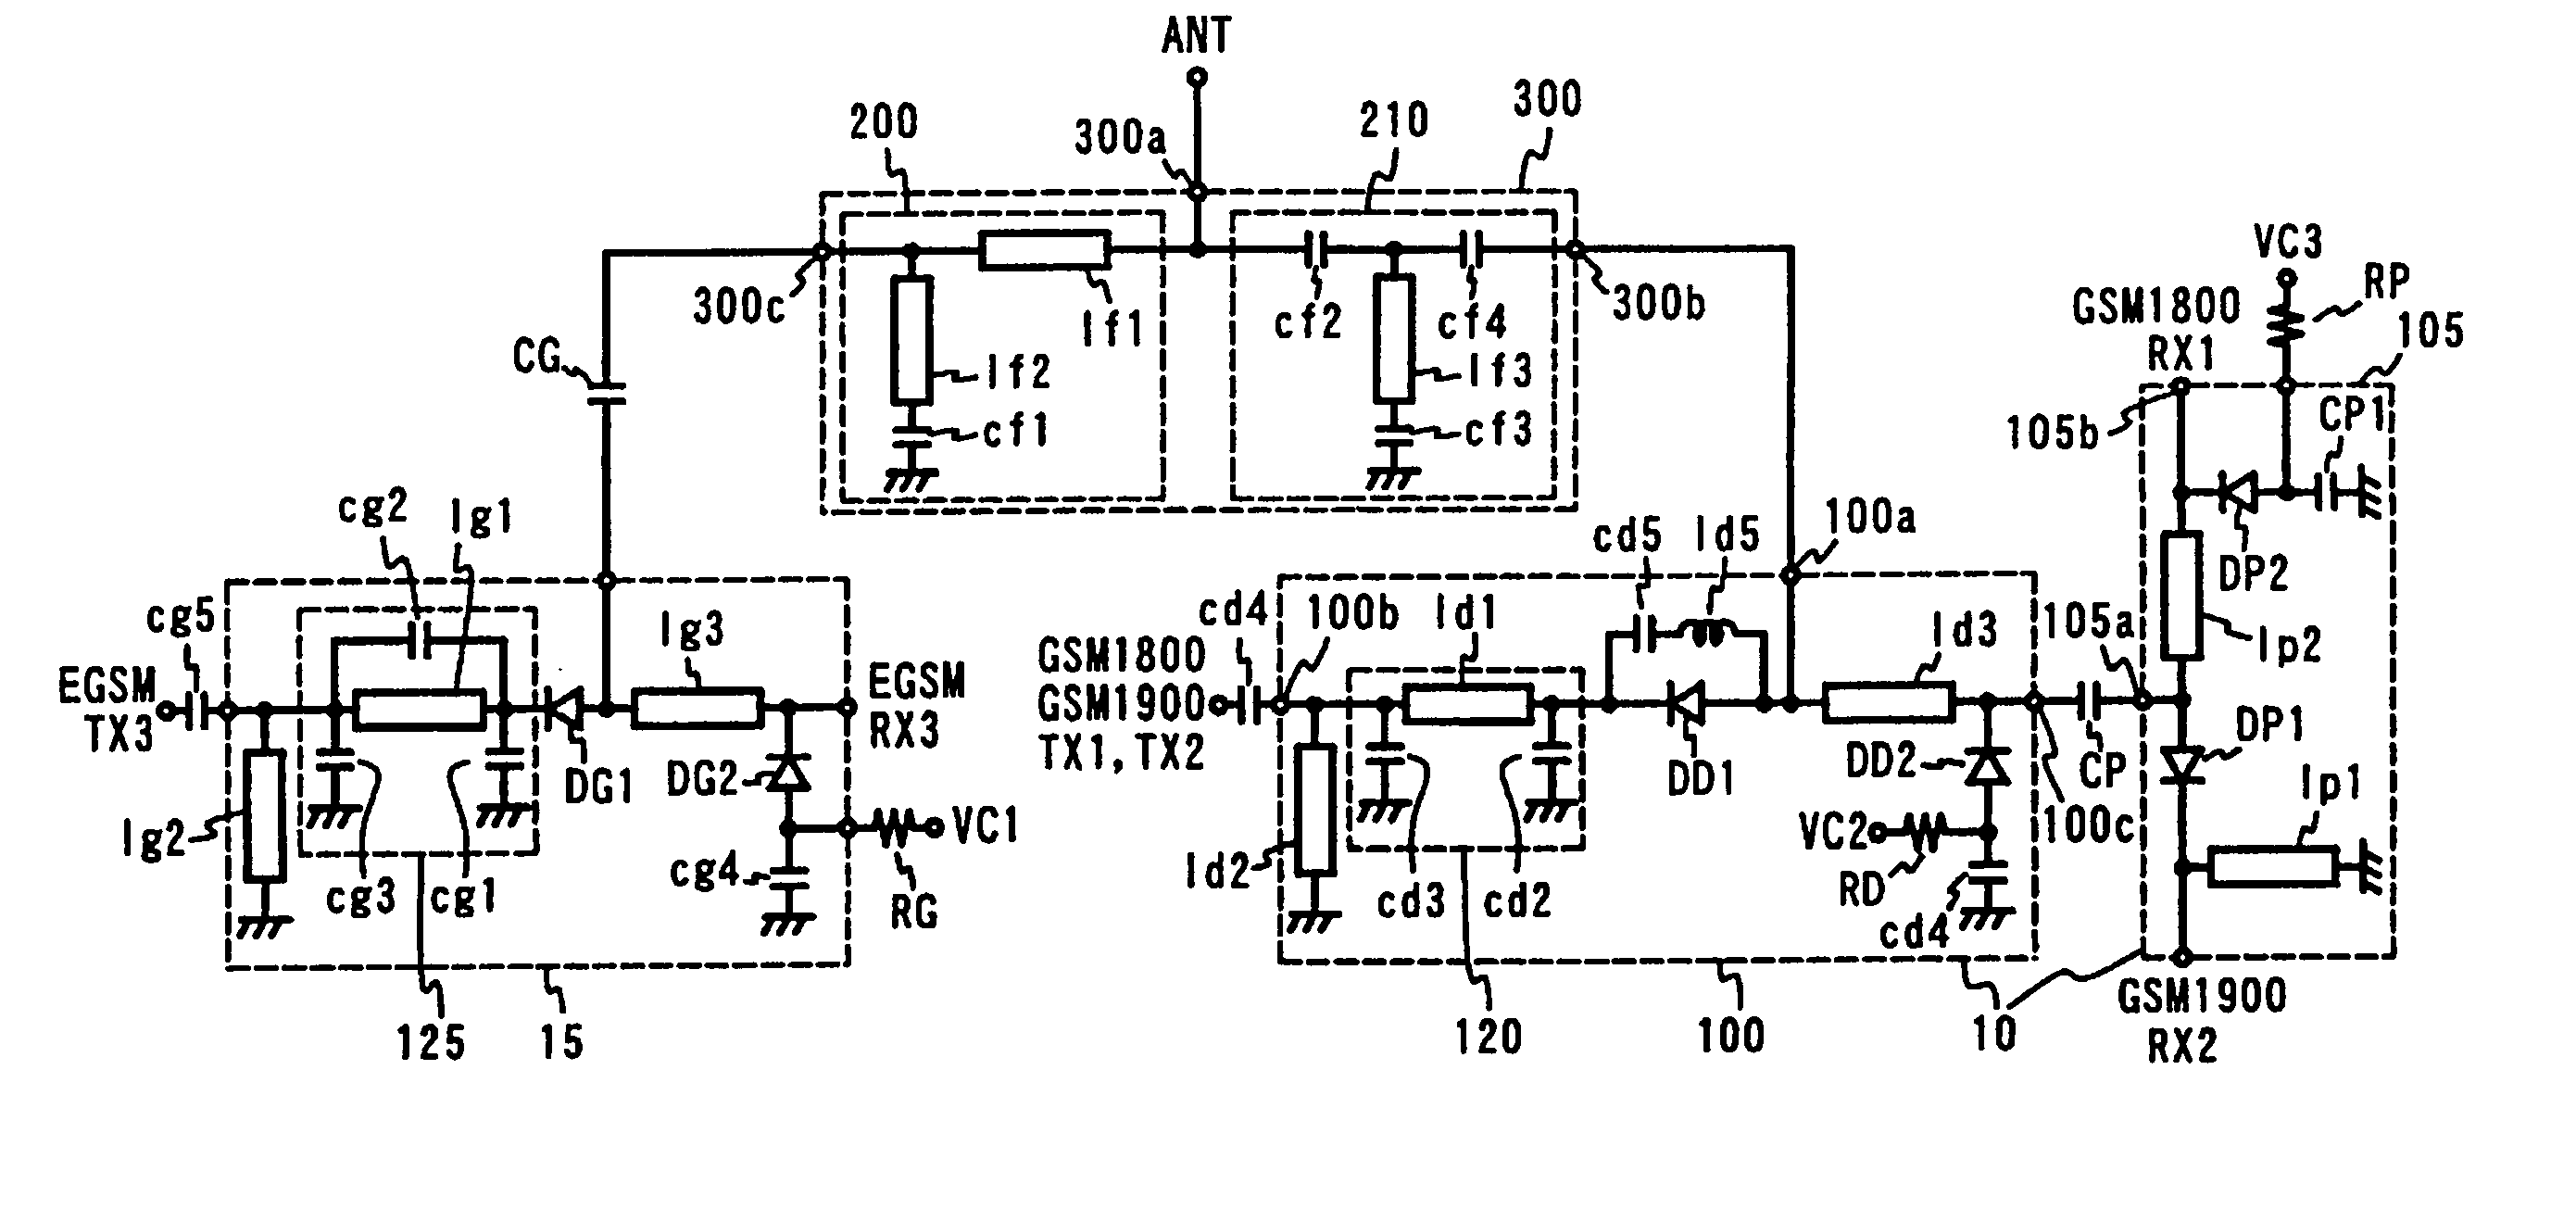 Switch circuit and composite high frequency elements